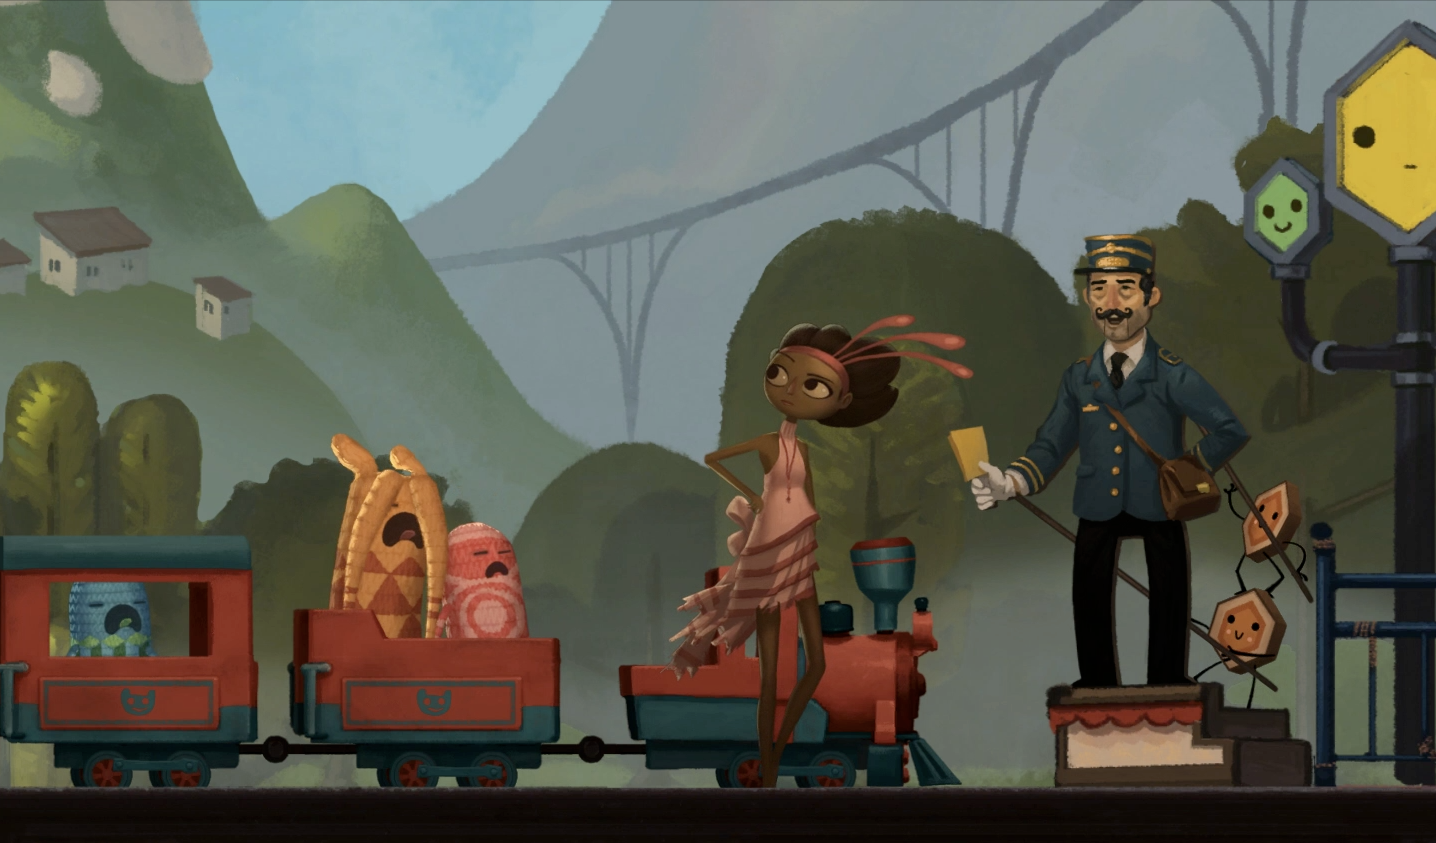 The Final Part Of Broken Age Is A Bittersweet Ending To A Great Game